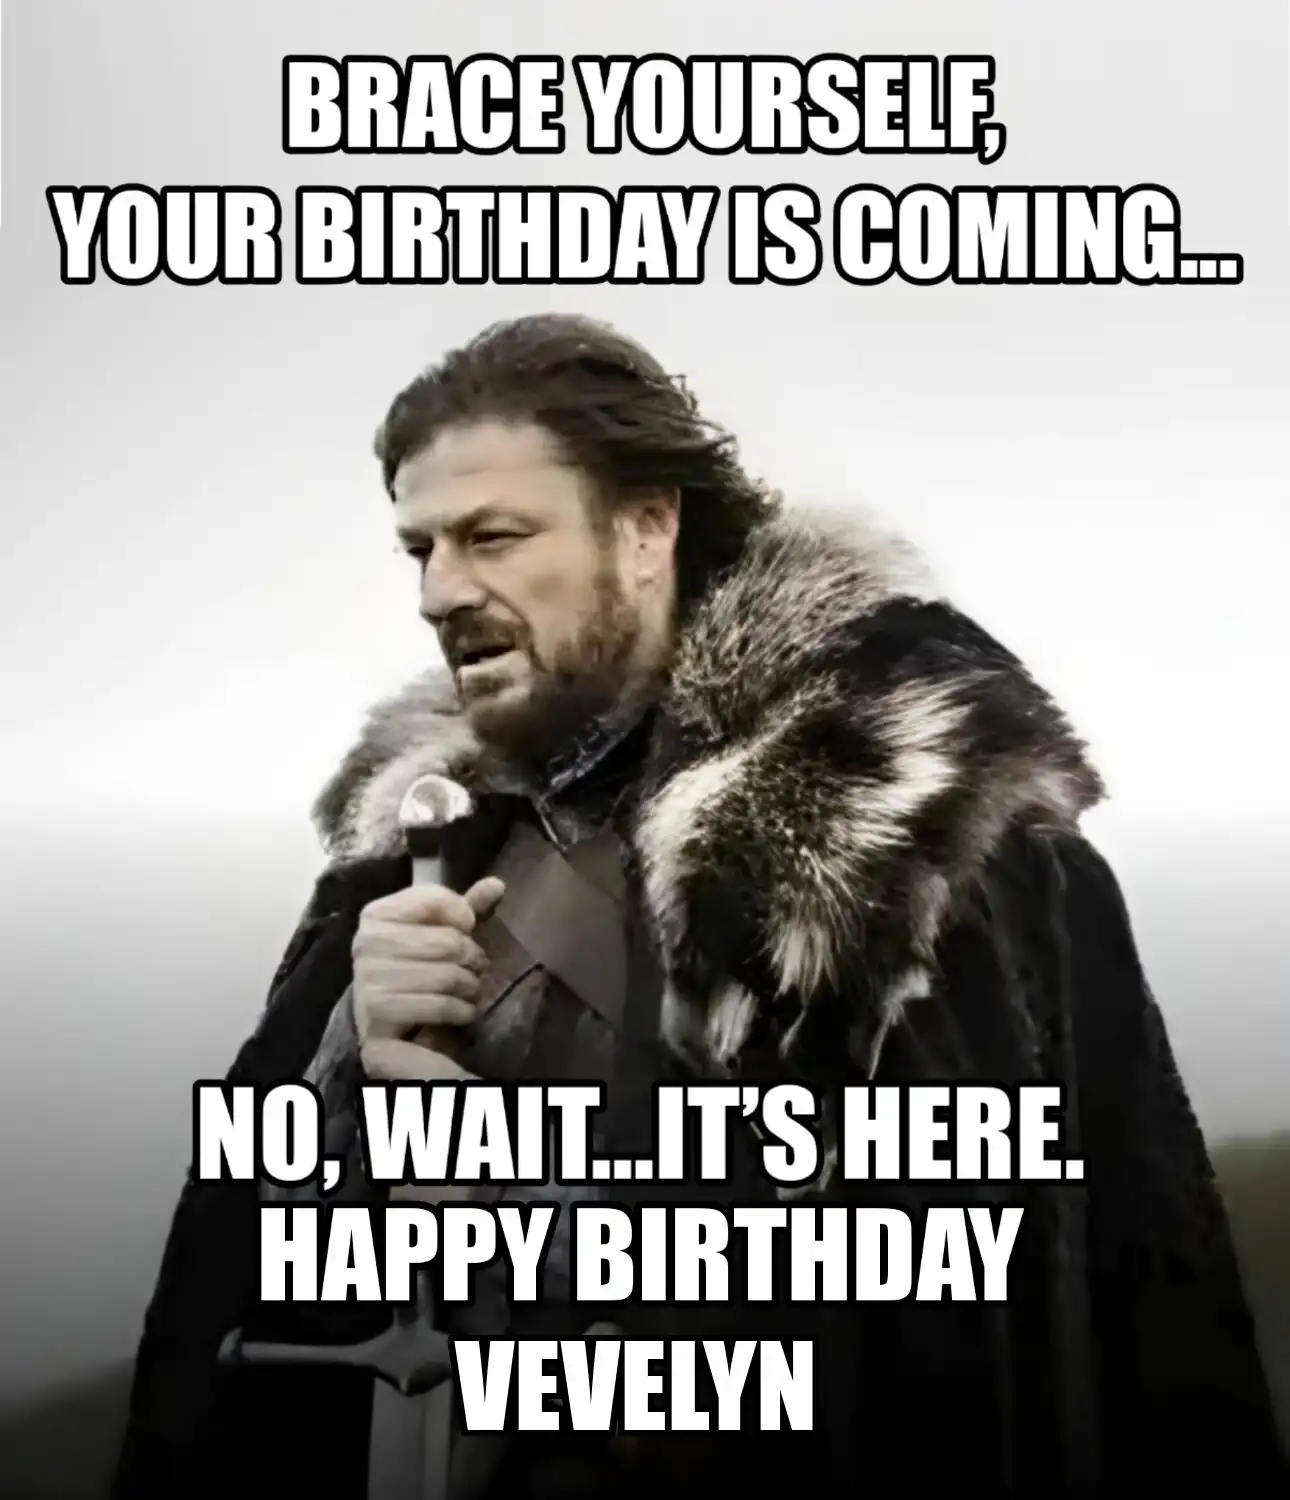 Happy Birthday Vevelyn Brace Yourself Your Birthday Is Coming Meme